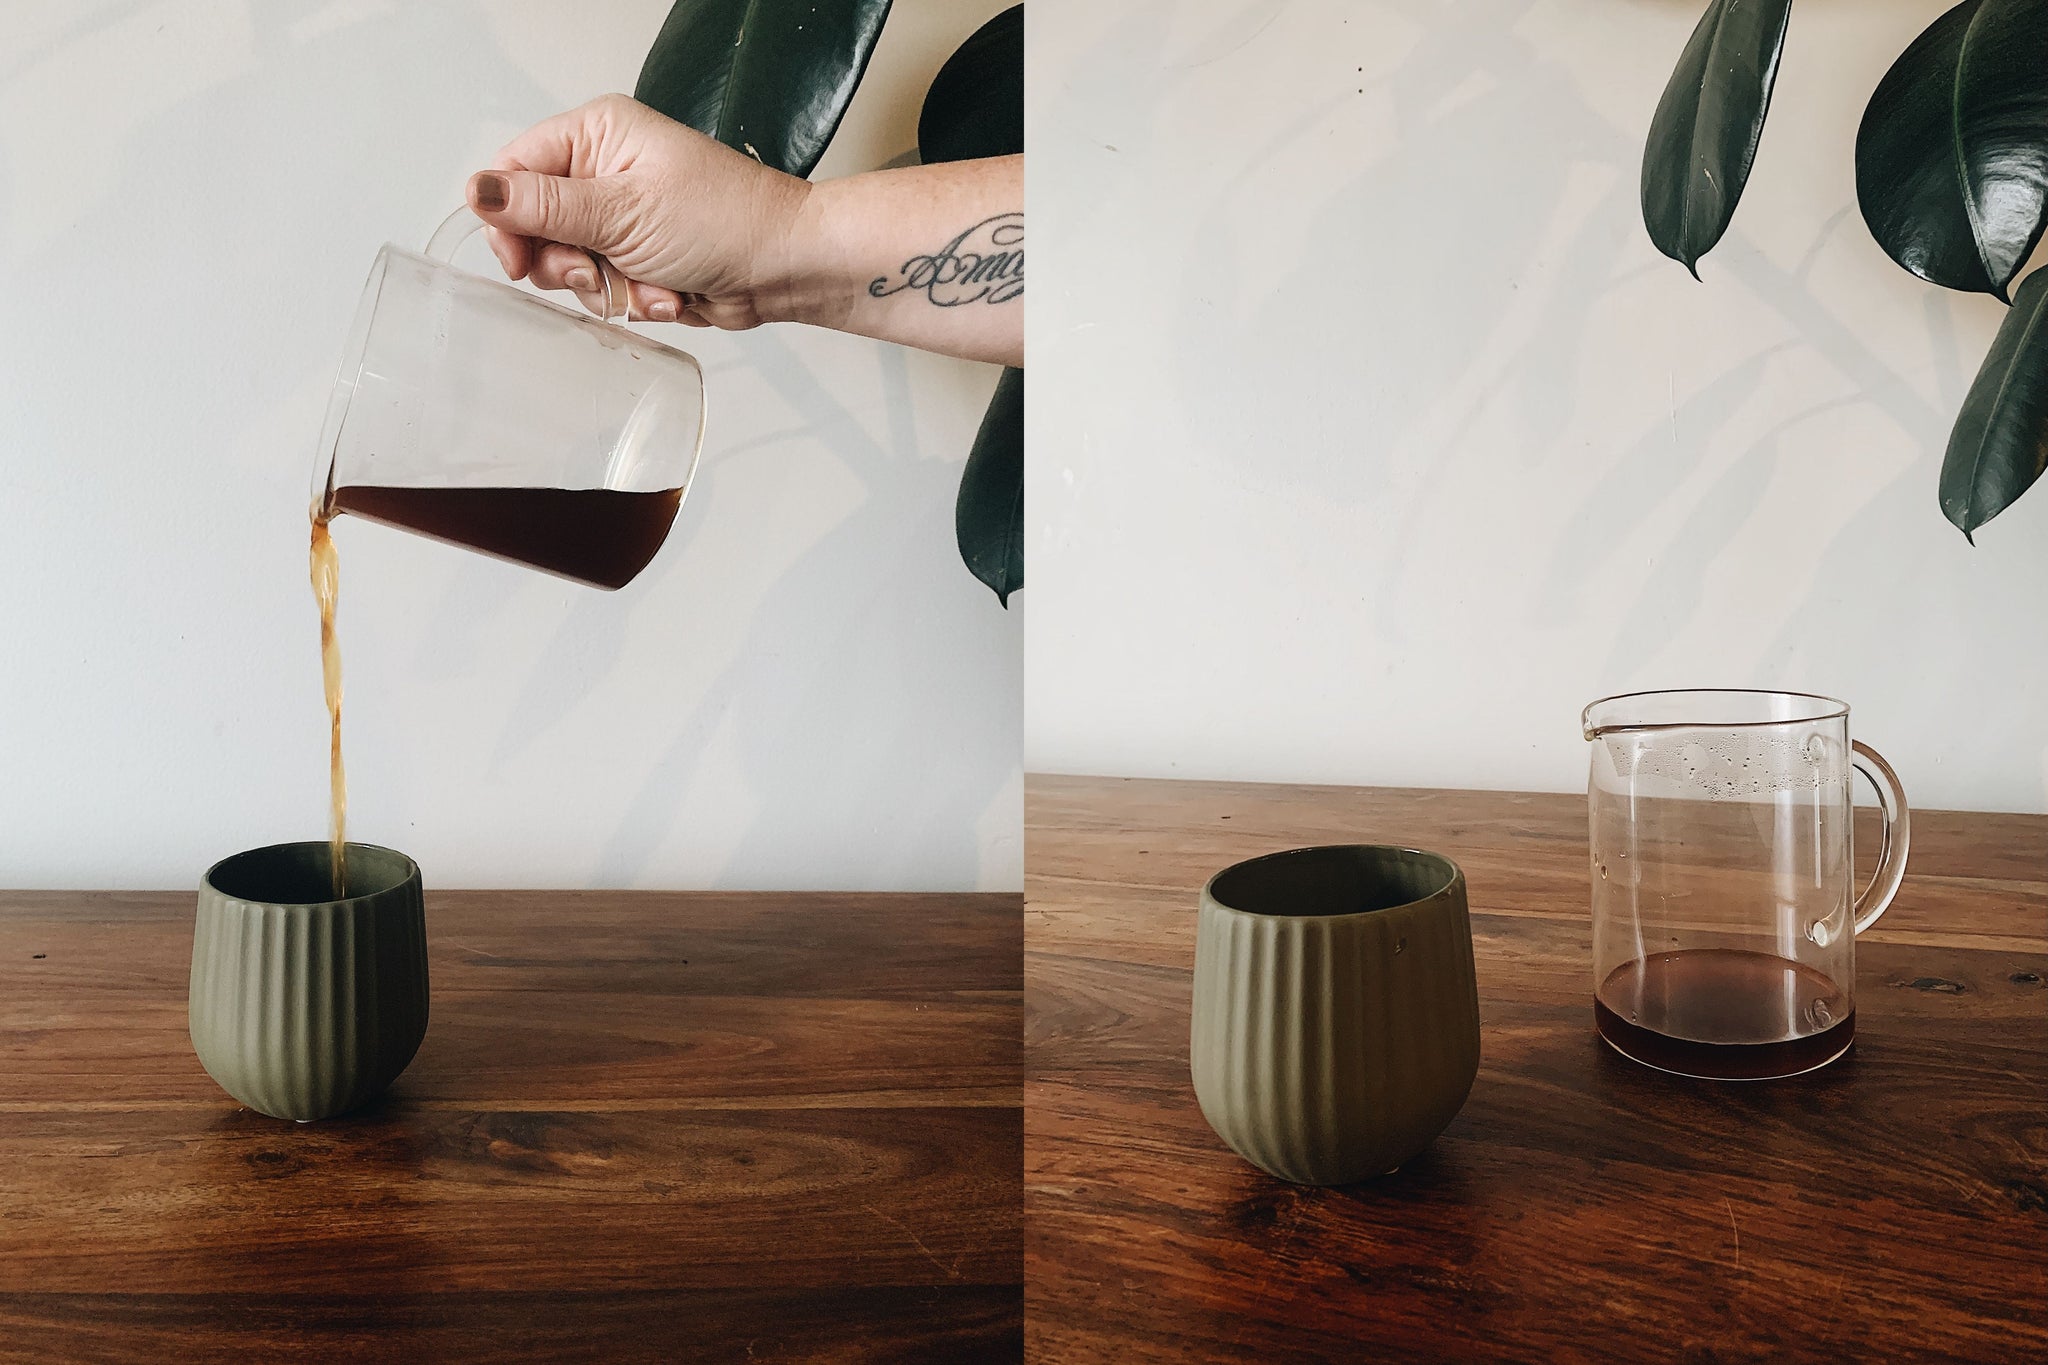 L: Pouring brewed coffee from VacOne carafe into grey cup; R: grey cup and VacOne carafe with coffee